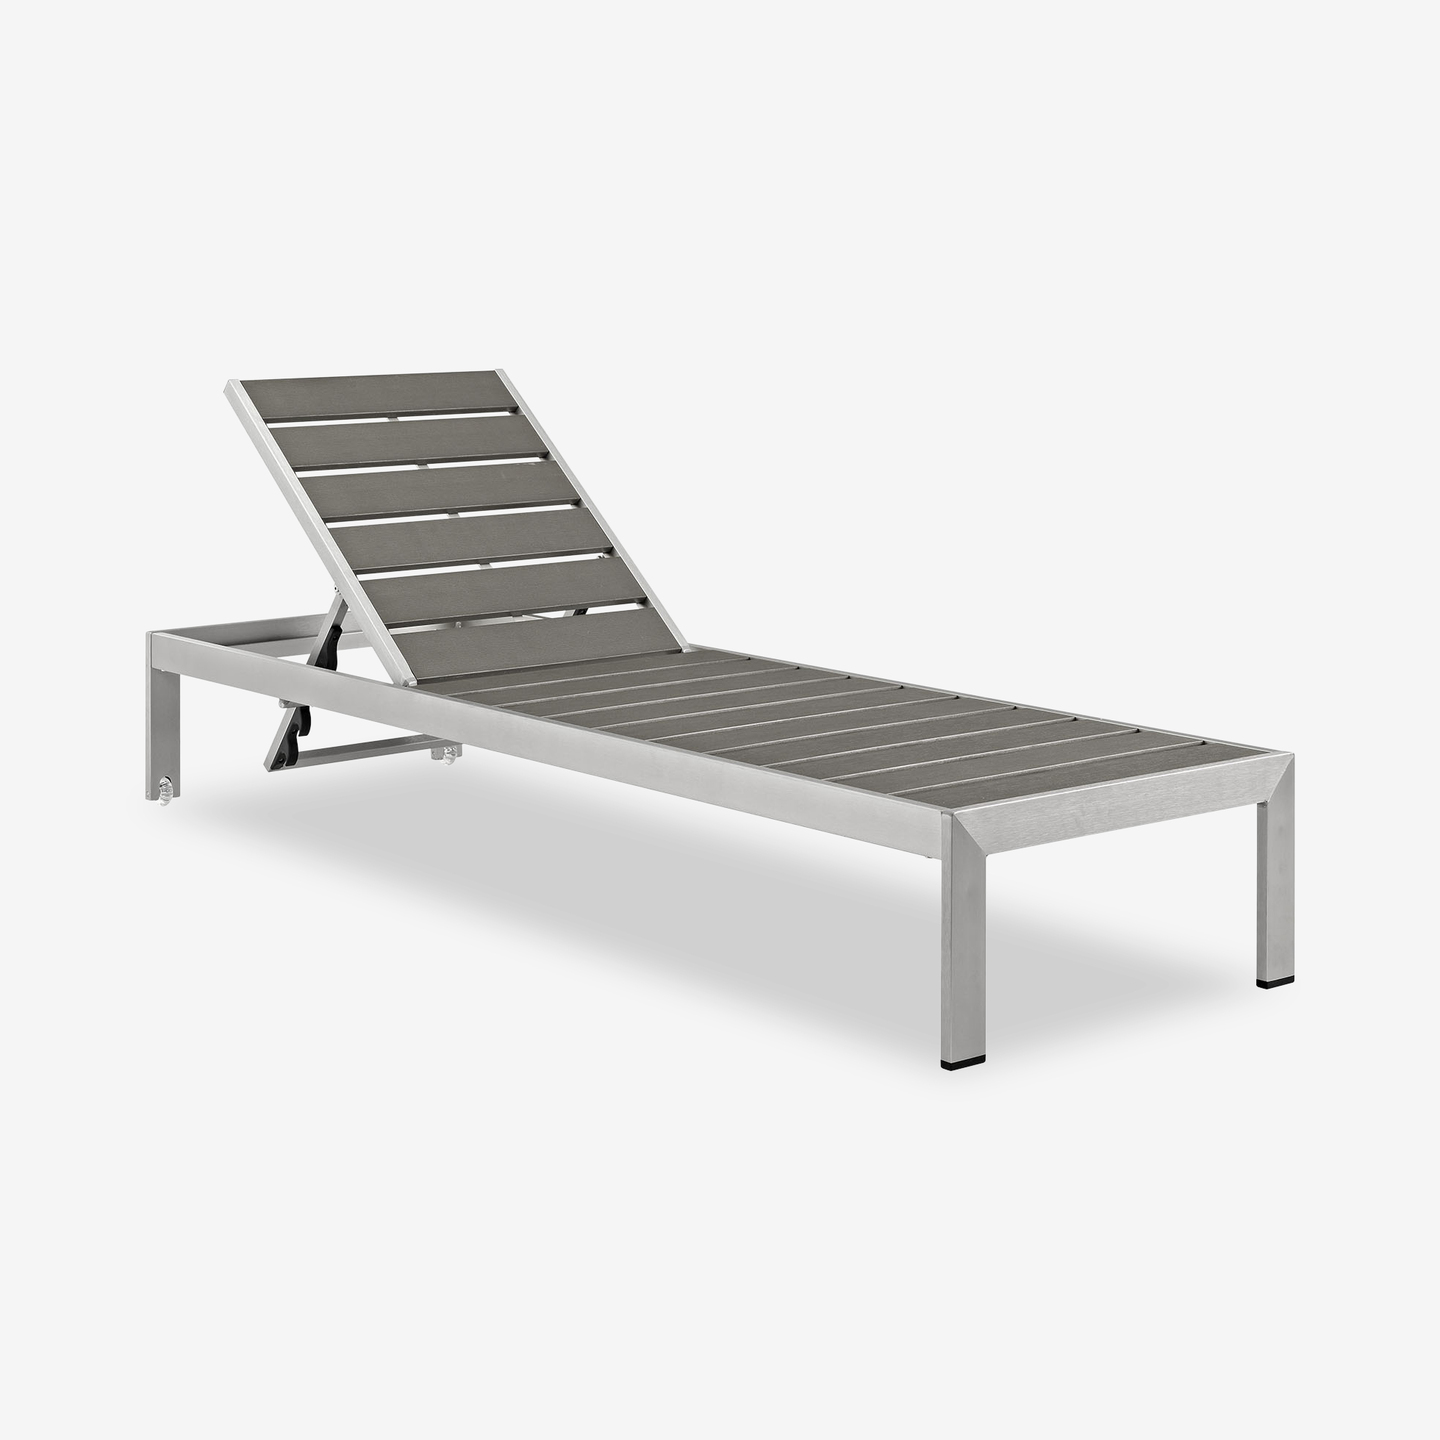 1230_Breeze-Outdoor-Patio-Chaise_3Q_2021